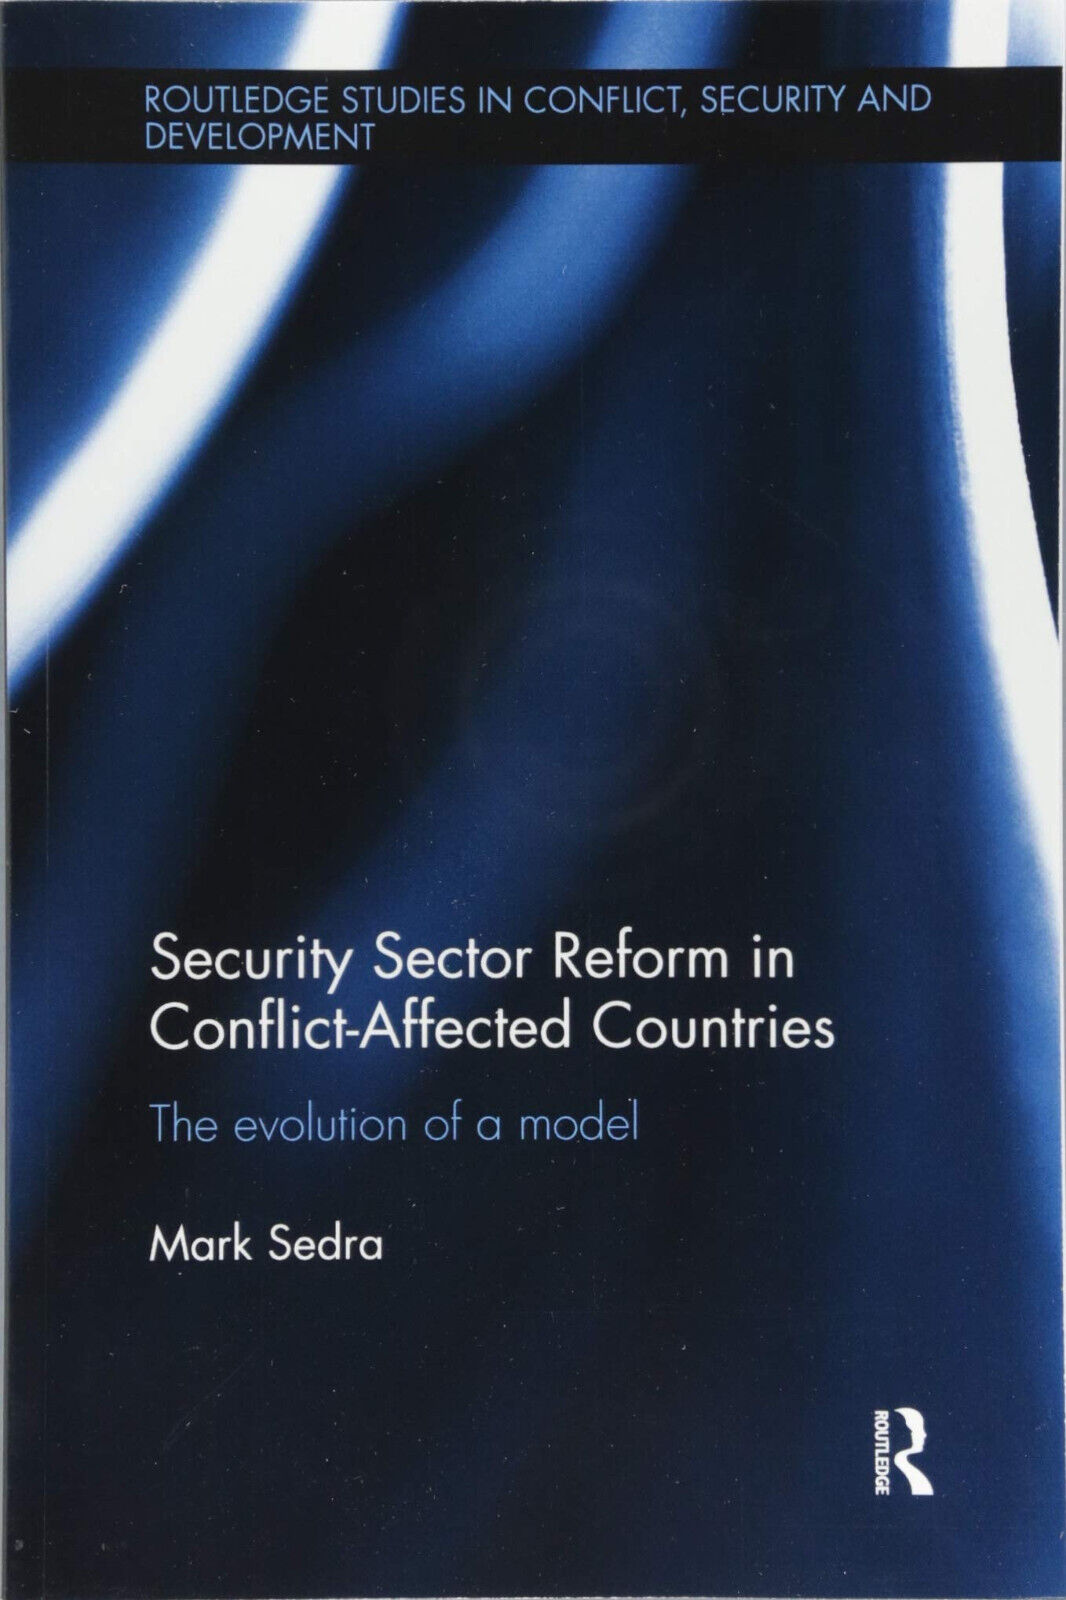 Security Sector Reform in Conflict-Affected Countries - Mark - Routledge, 2018 libro usato